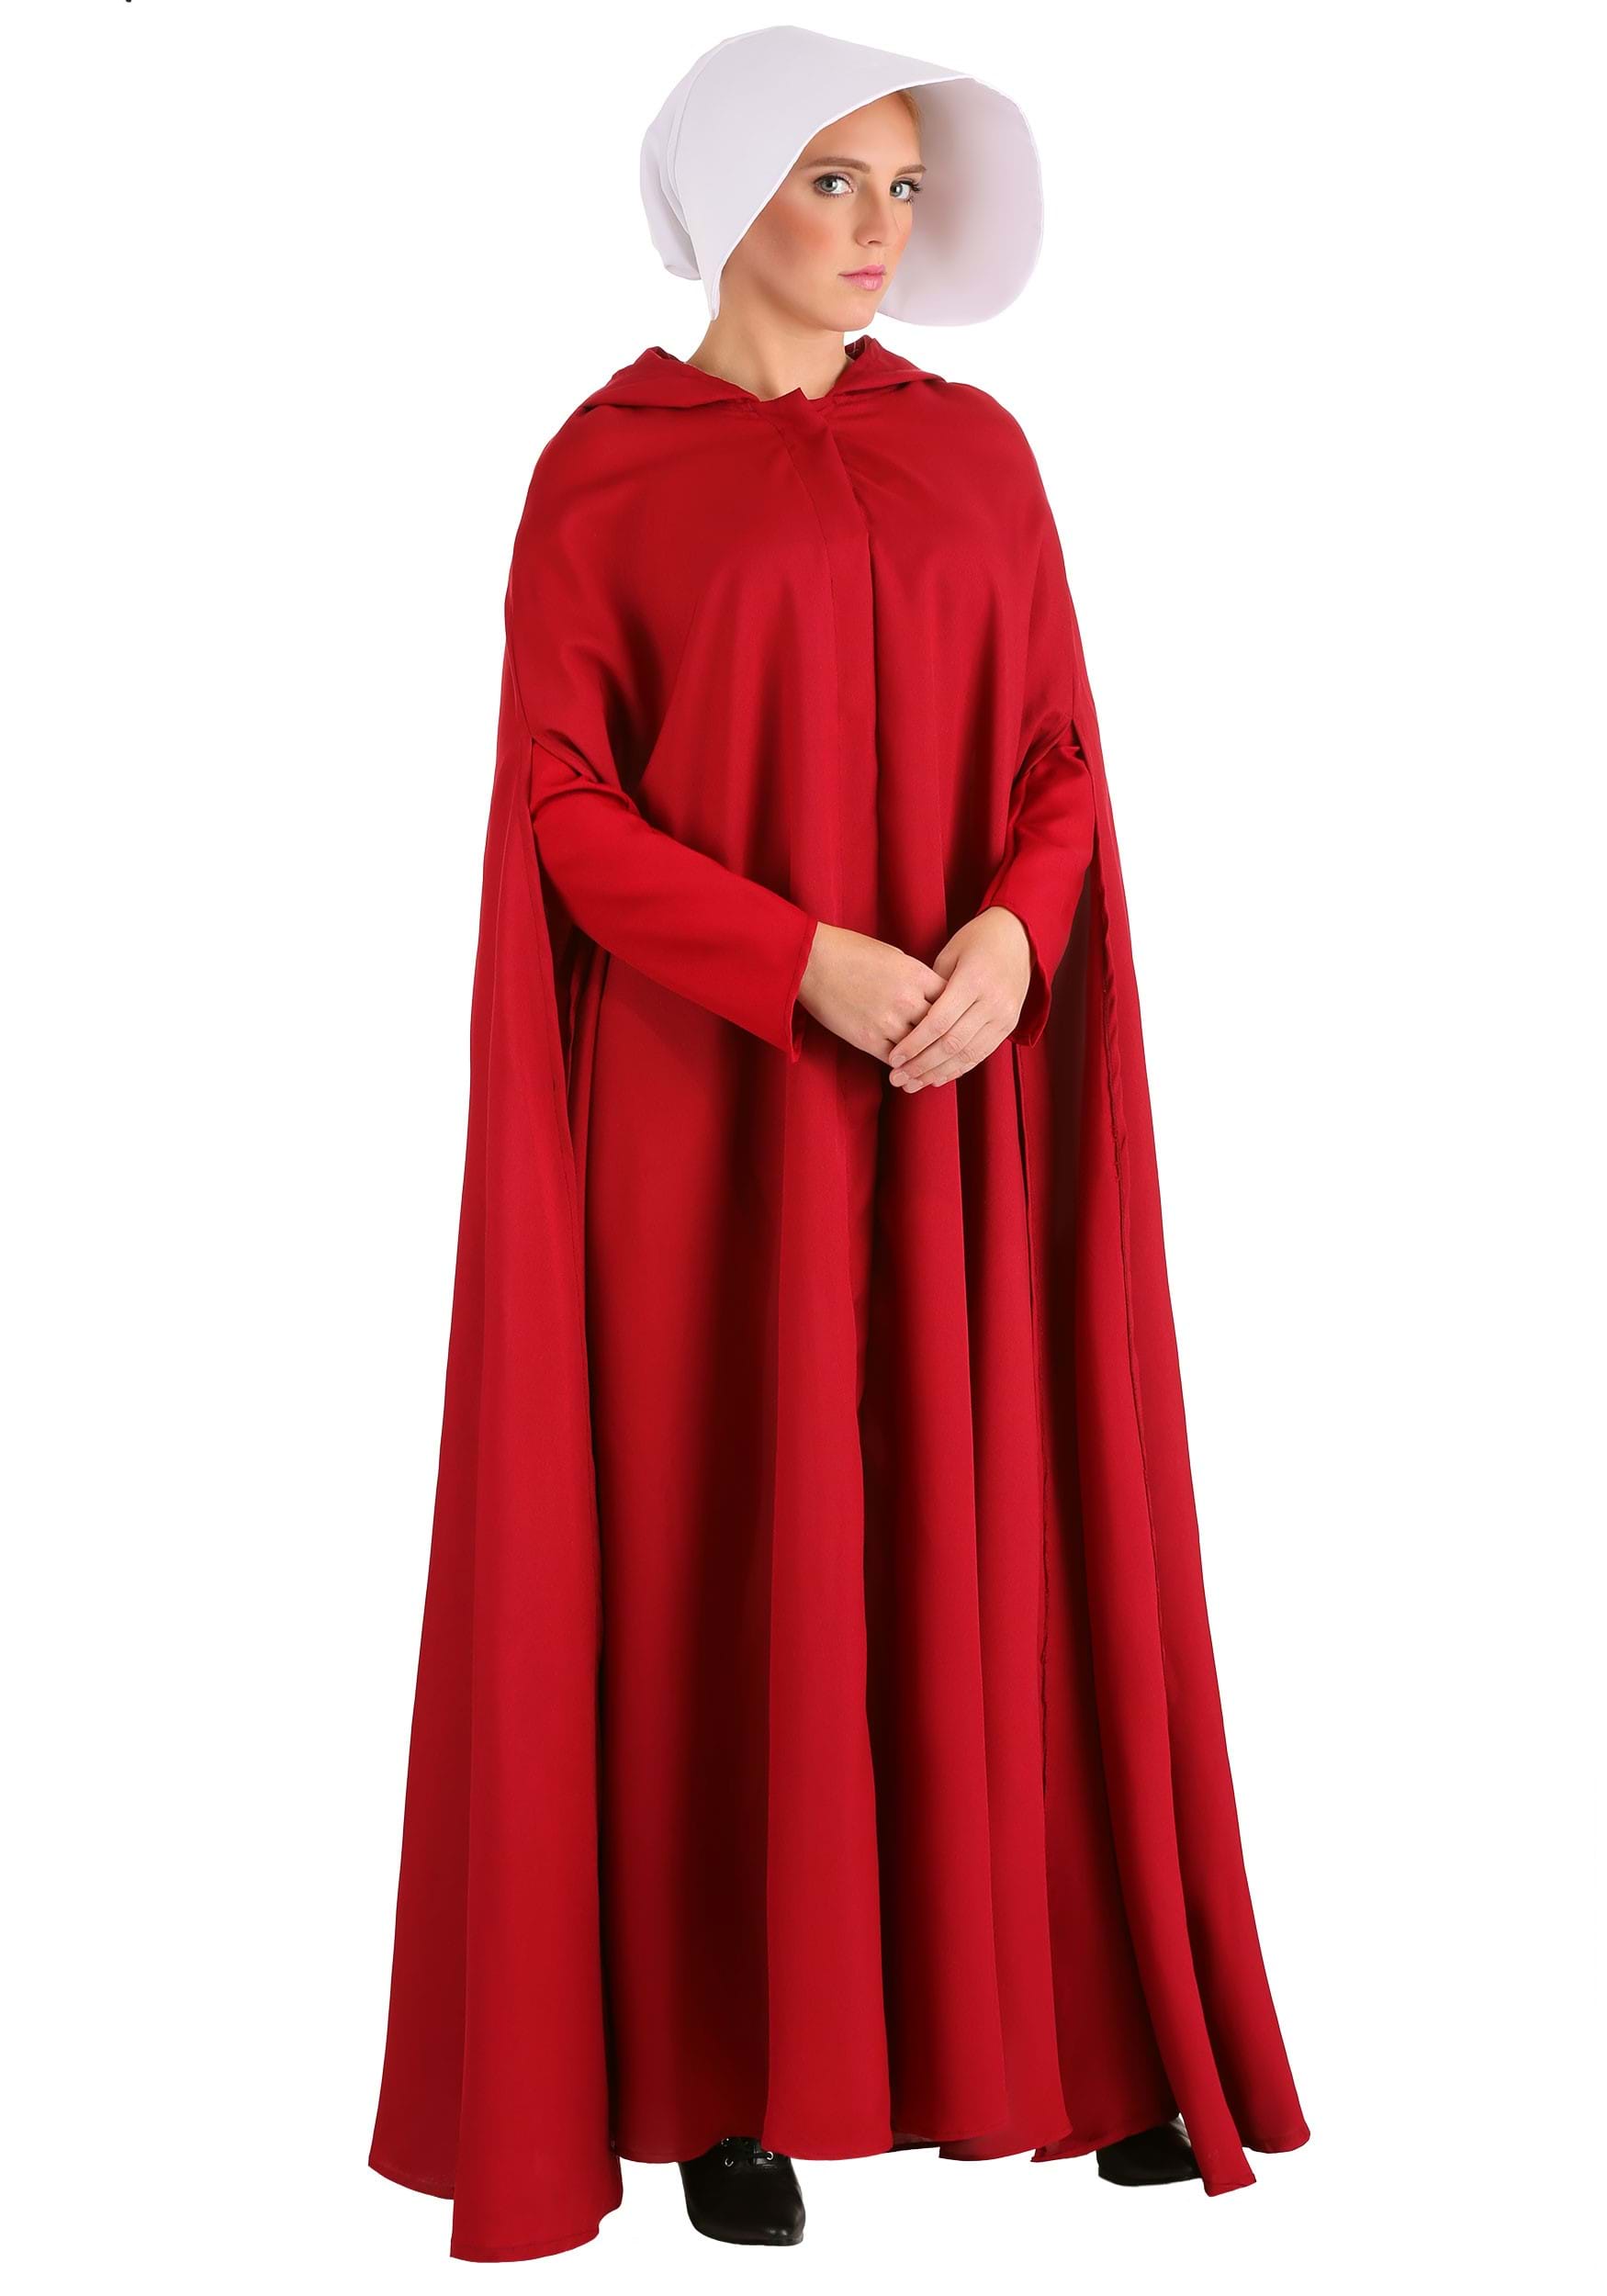 Photos - Fancy Dress Character FUN Costumes Handmaid's Tale Costume for Women | Movie  Costume R 